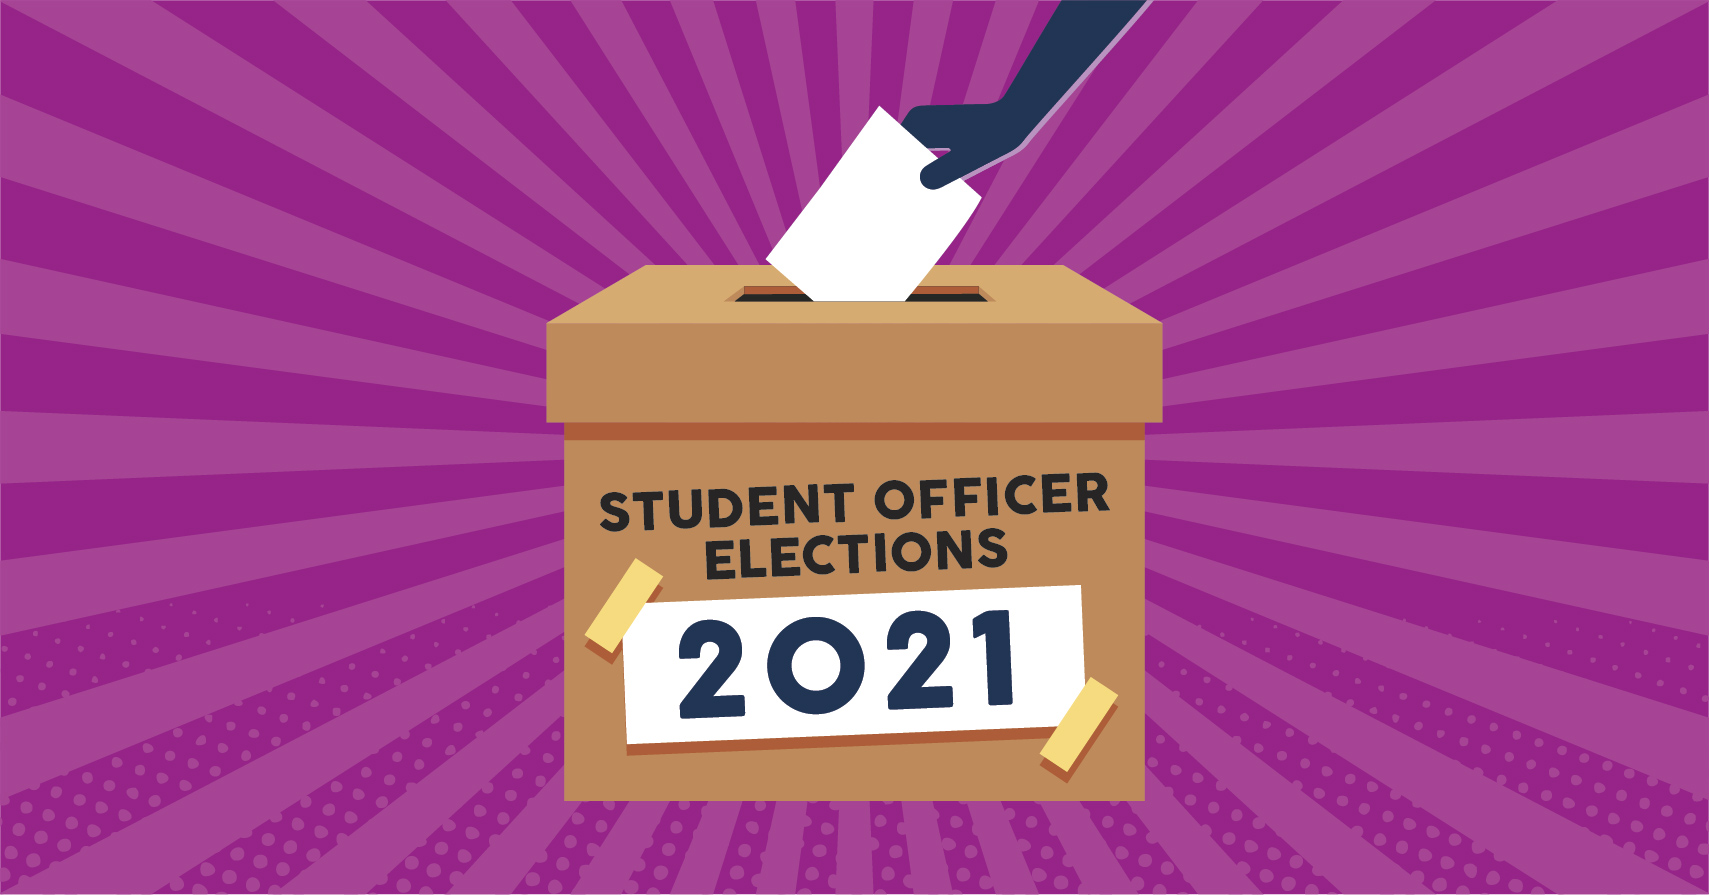 13520 10 (PINK) STUDENT ELECTIONS 2021 820X429